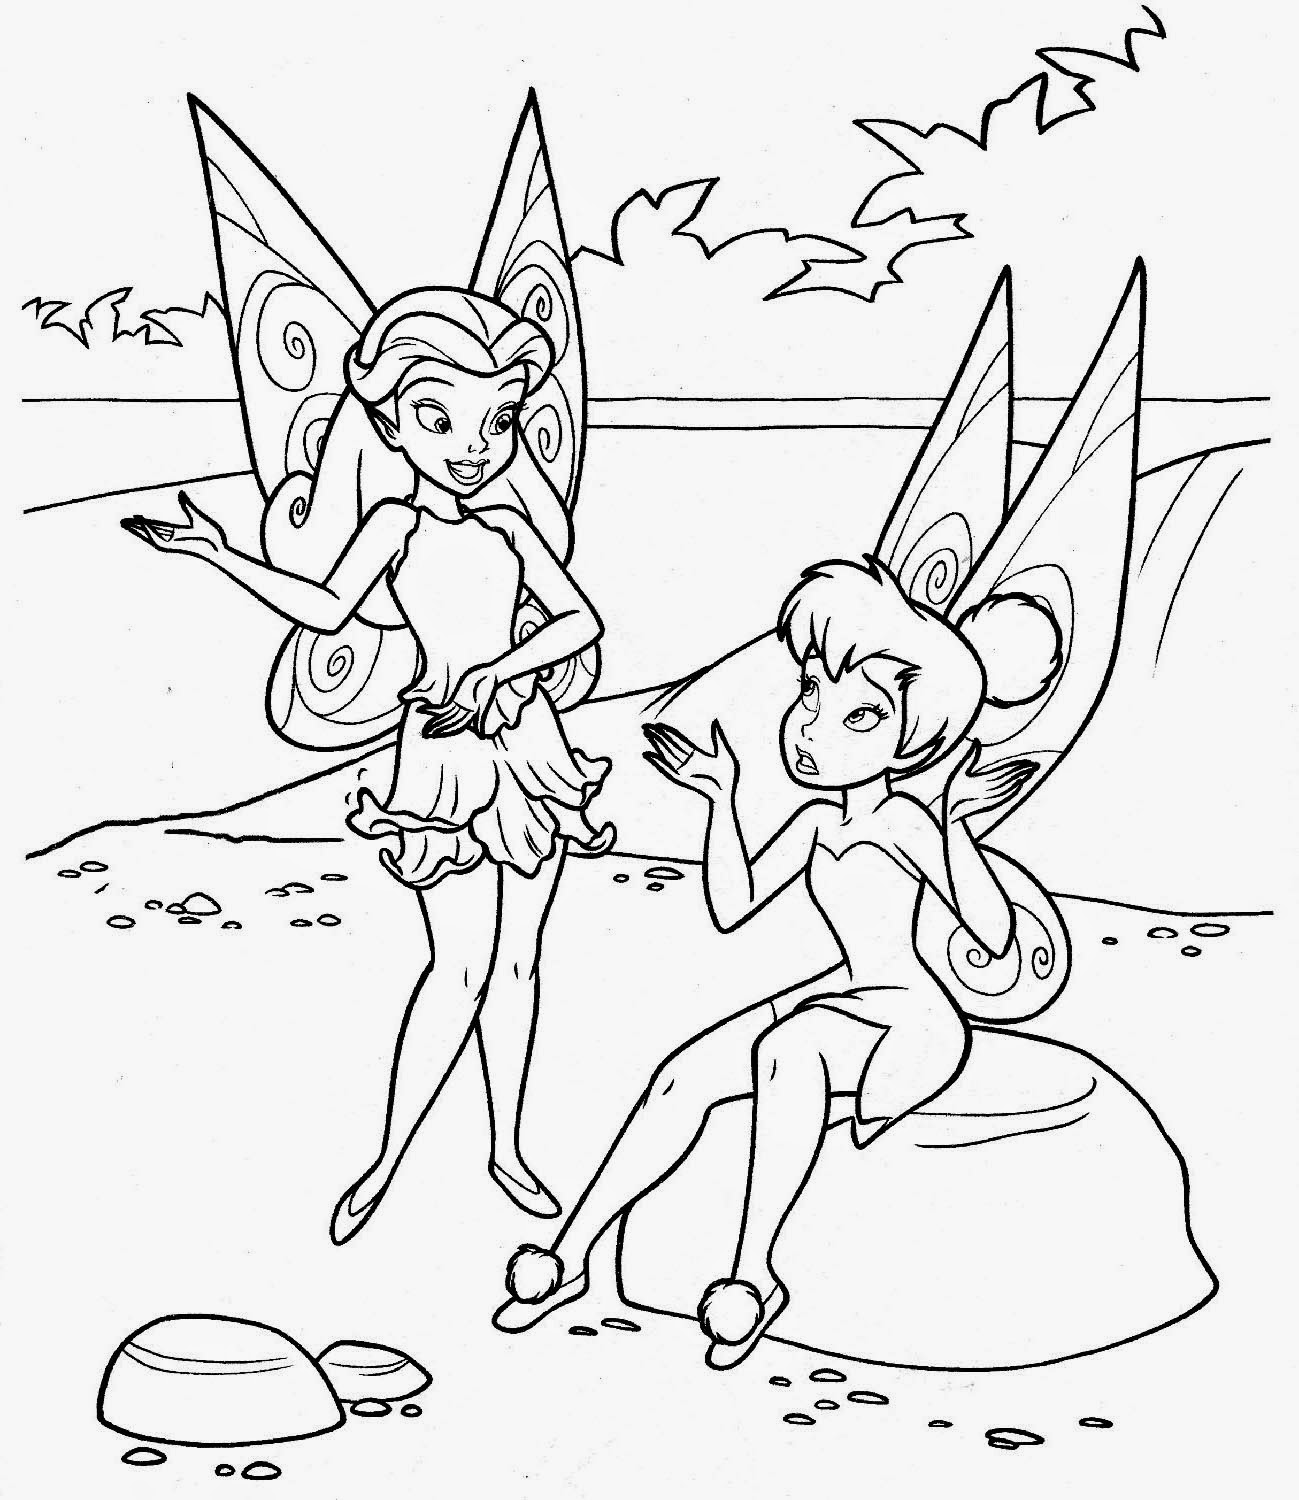 tinkerbell coloring 30 tinkerbell coloring pages free coloring pages free tinkerbell coloring 